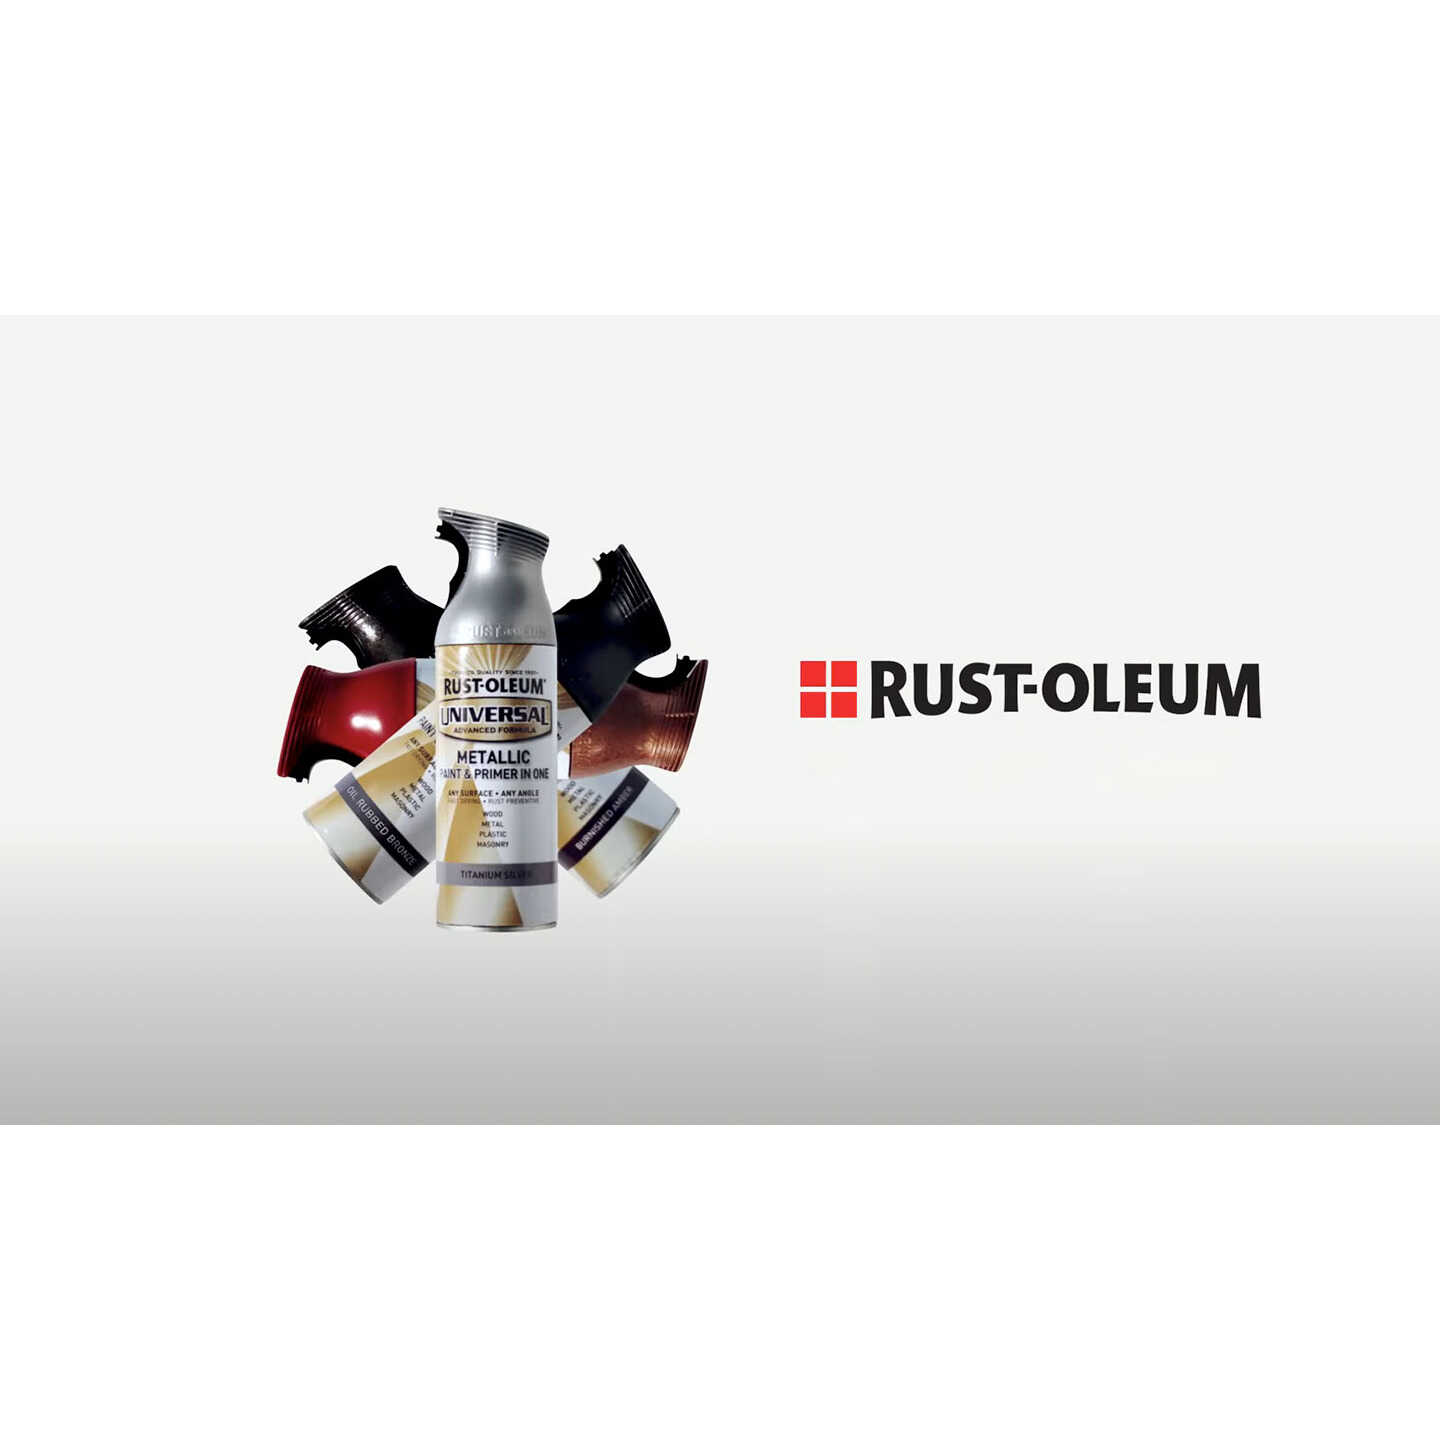 Rust-Oleum Universal Flat Black Spray Paint and Primer In One (NET